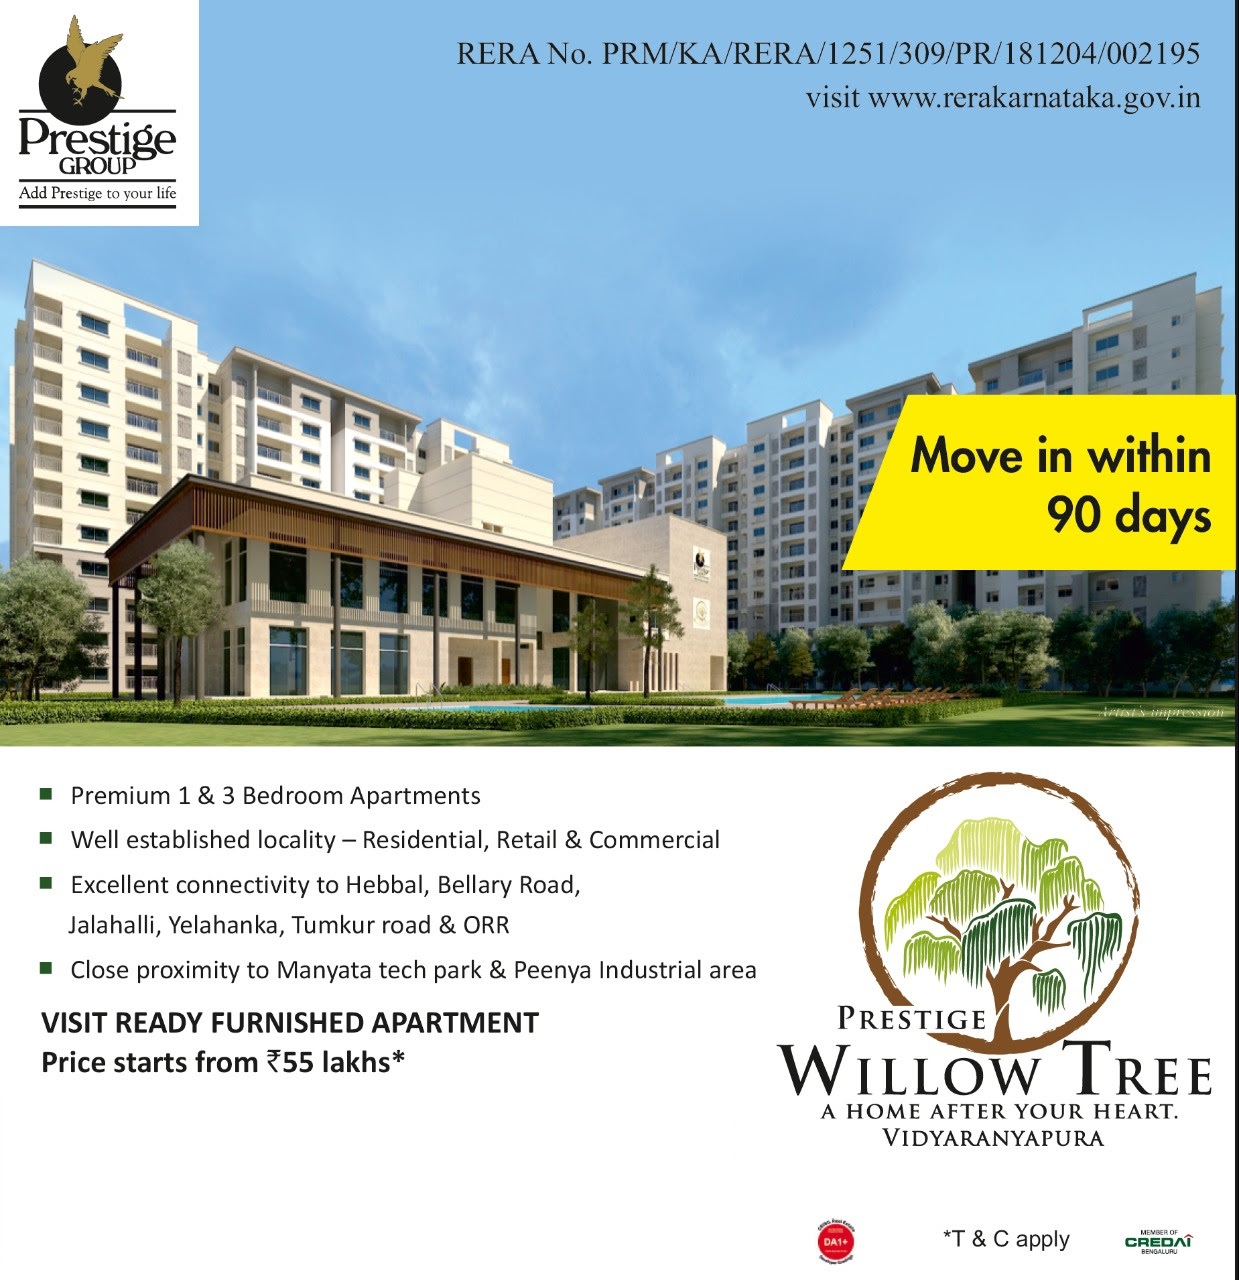 Move in within 90 days at Prestige Willow Tree, Bangalore Update